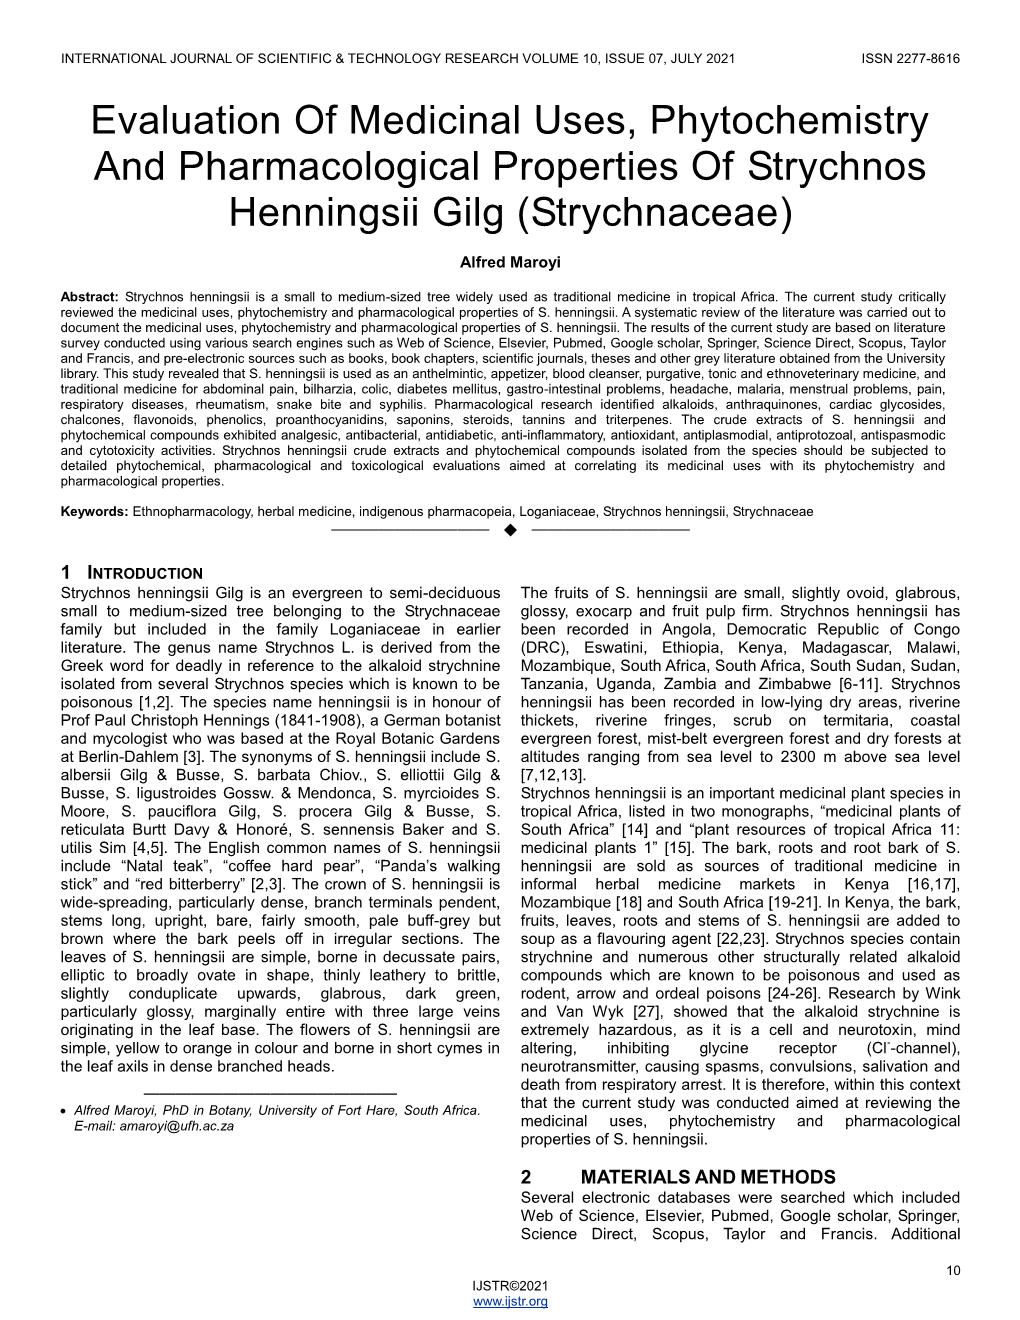 Evaluation of Medicinal Uses, Phytochemistry and Pharmacological Properties of Strychnos Henningsii Gilg (Strychnaceae)